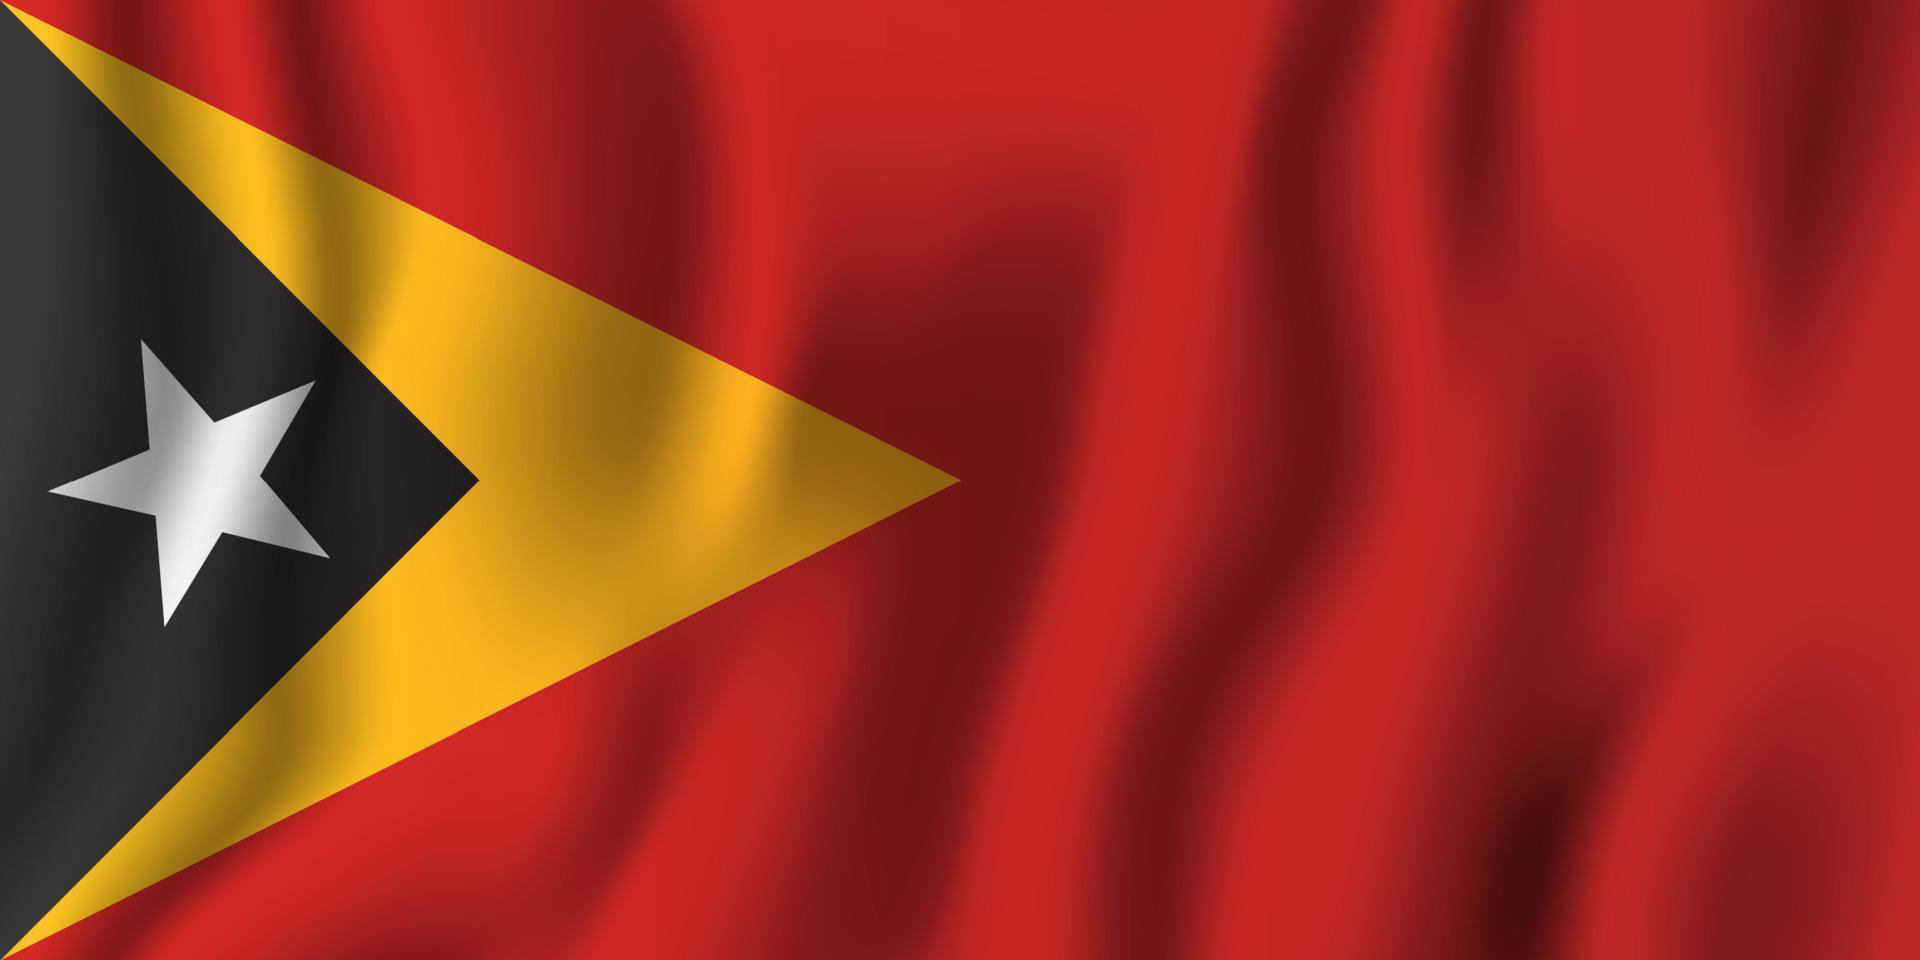 East Timor realistic waving flag vector illustration. National country background symbol. Independence day